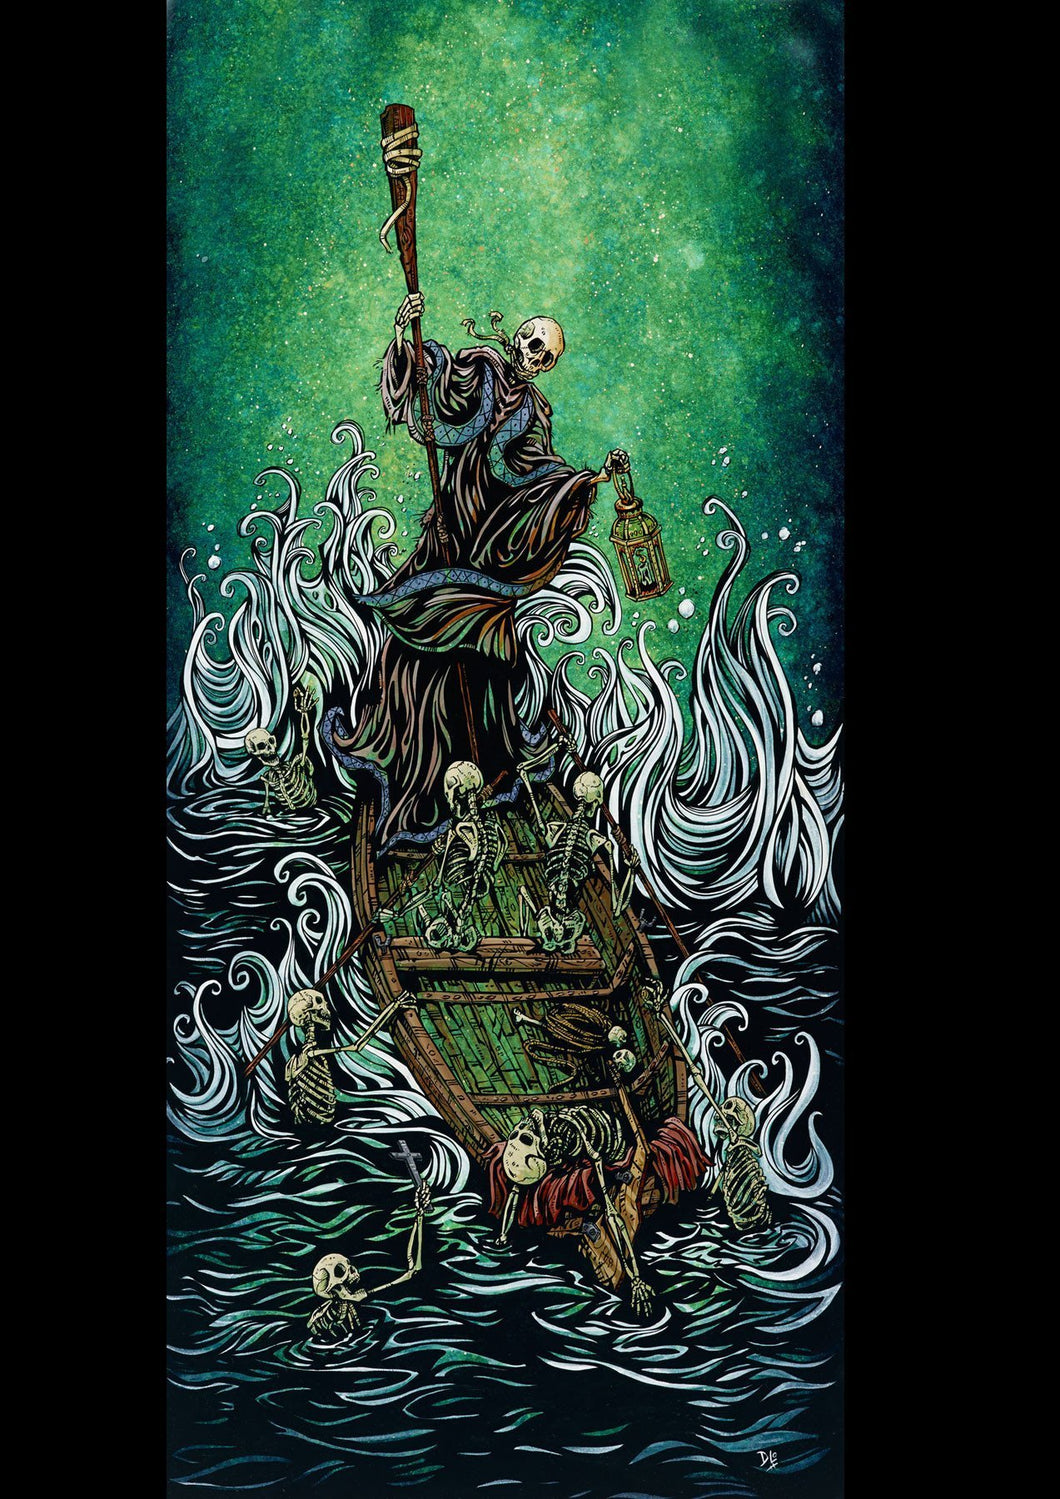 The Boatman on the River Styx